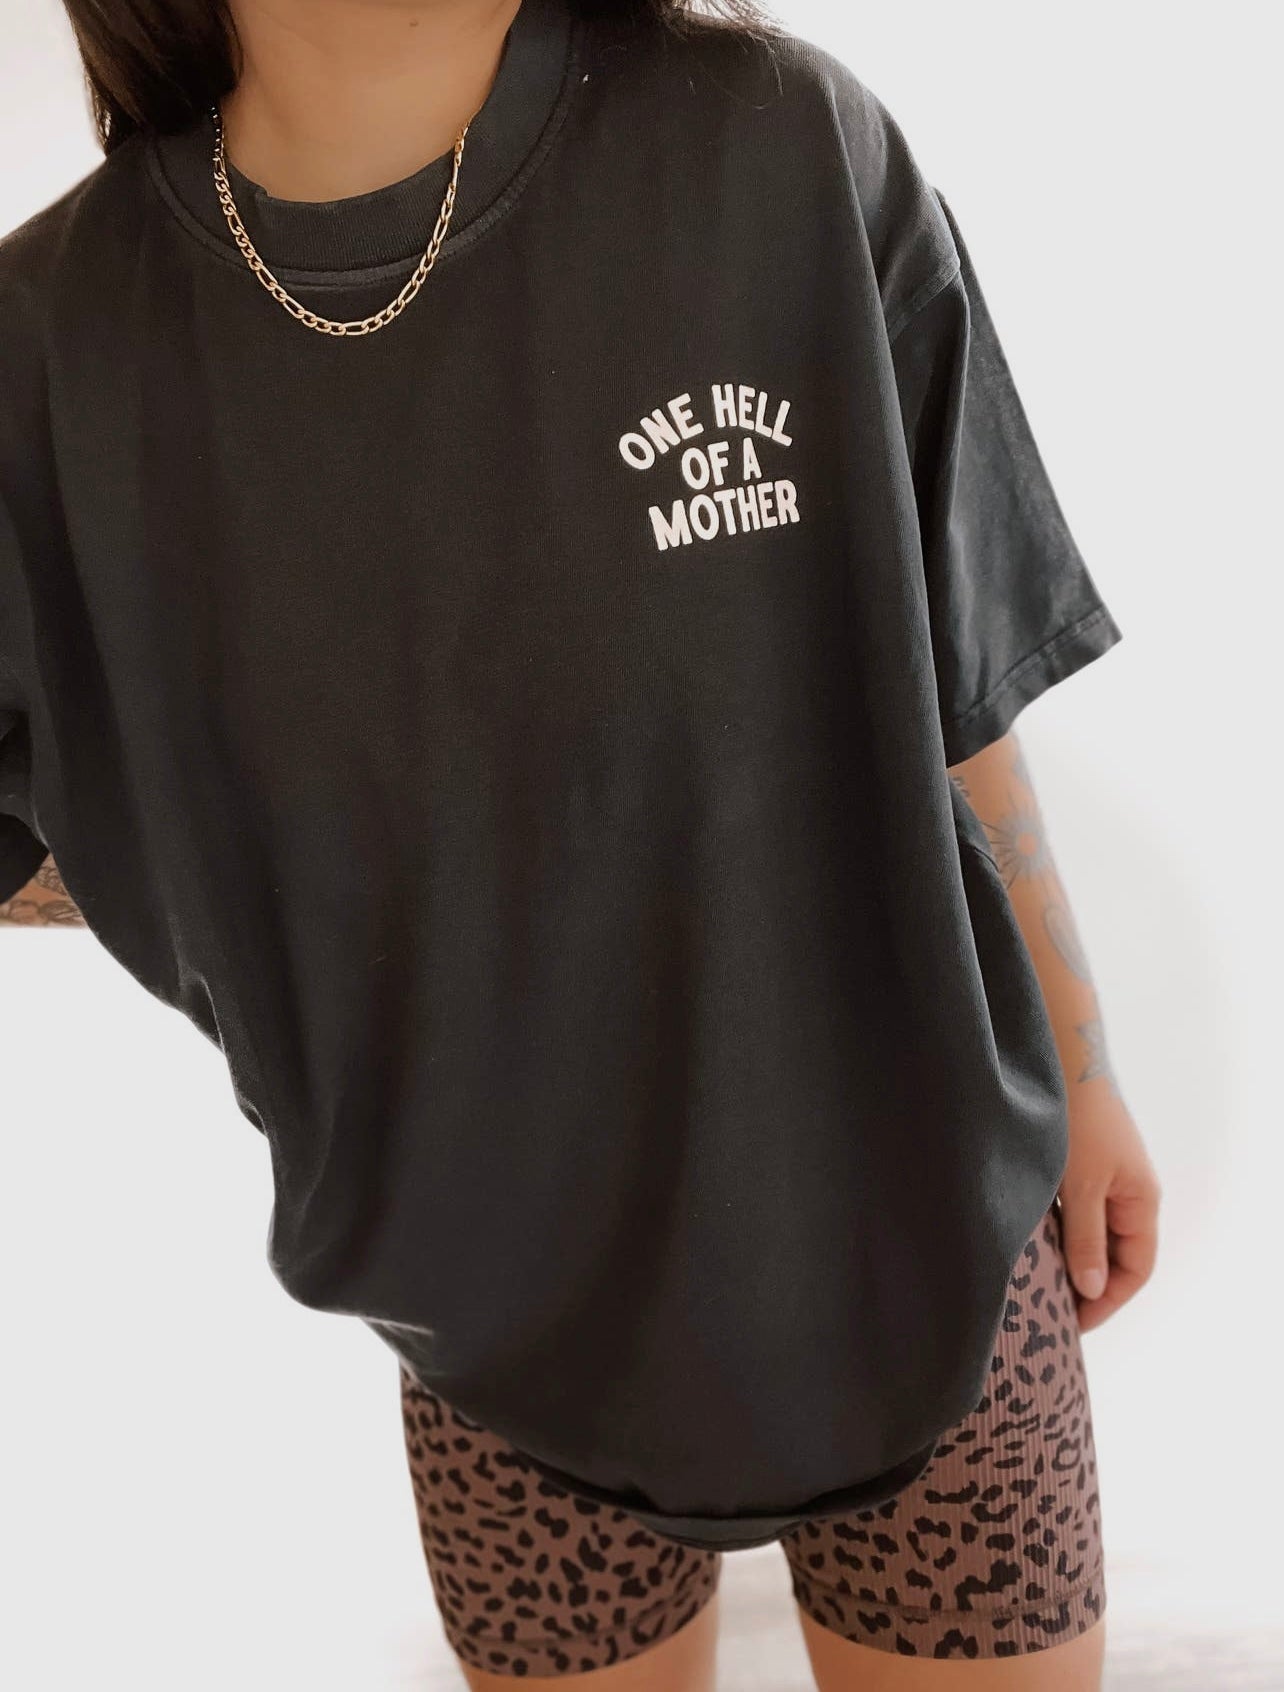 One Hell of A Mother Tee